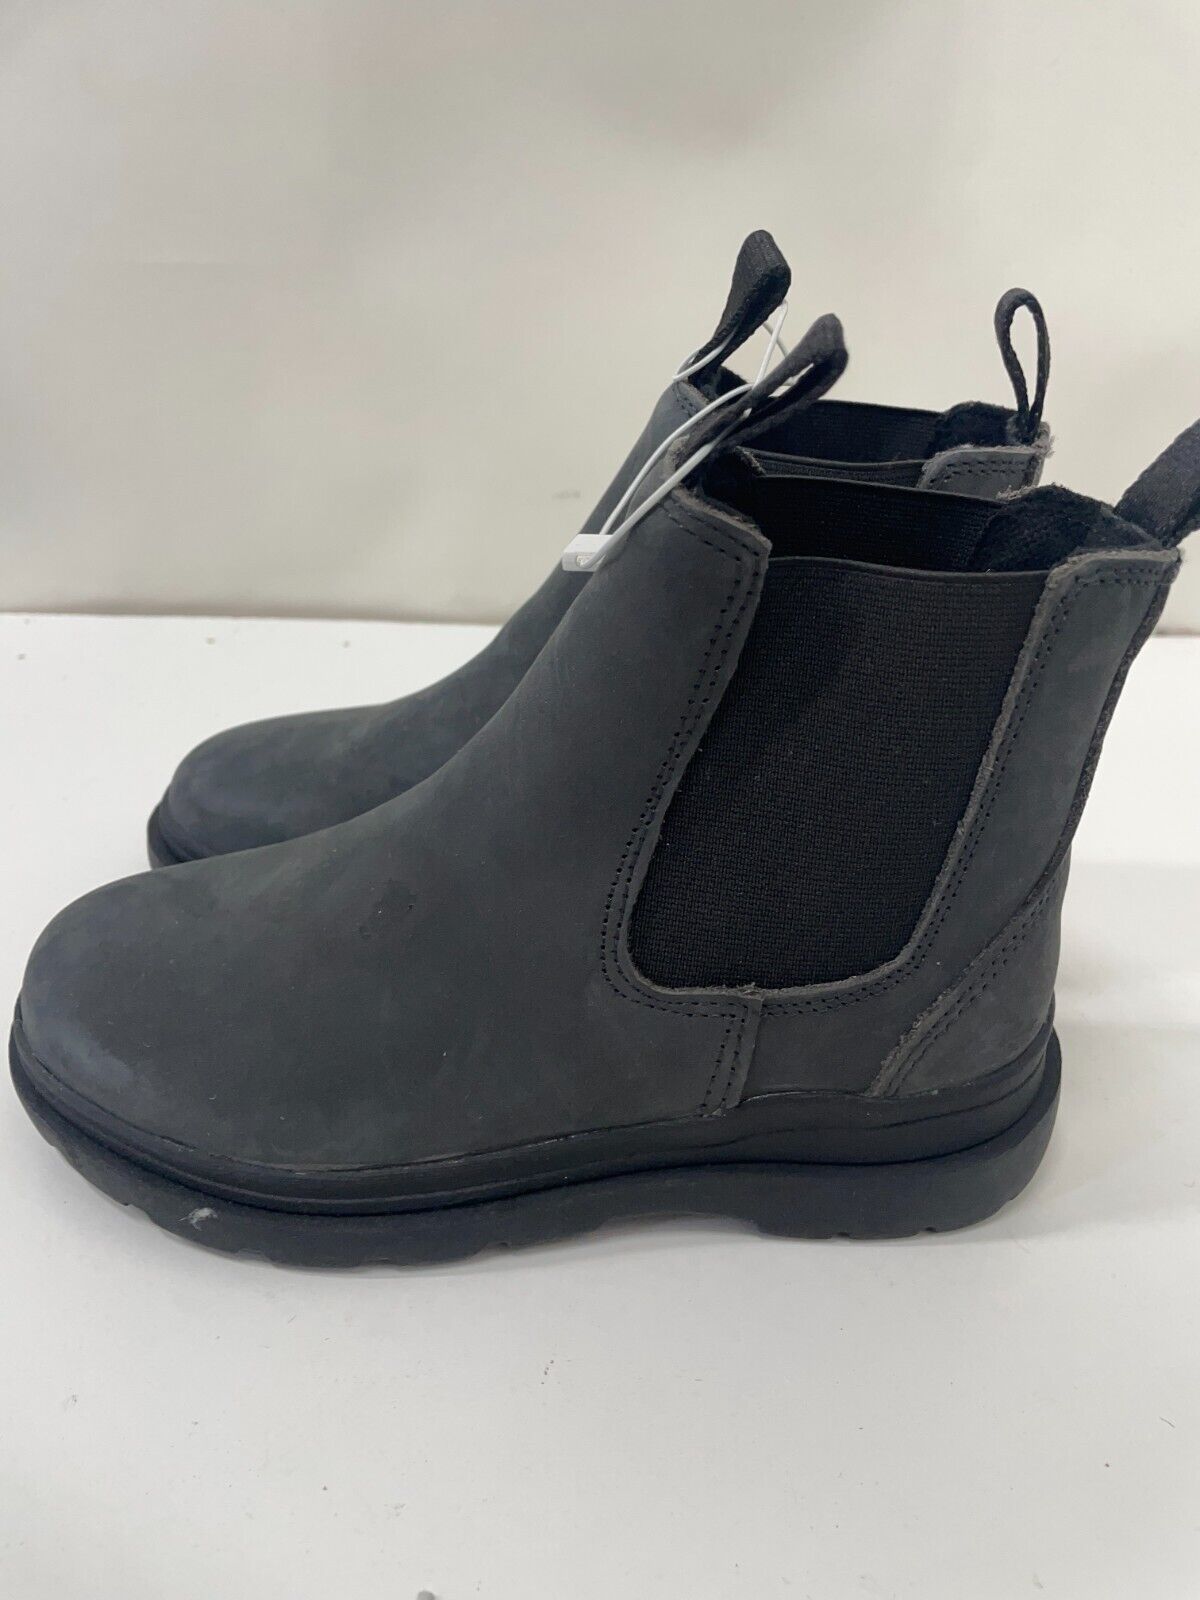 Zara Kids 31EU Goring Elastic Leather Ankle Boots Charcoal Gray 2137/030/802